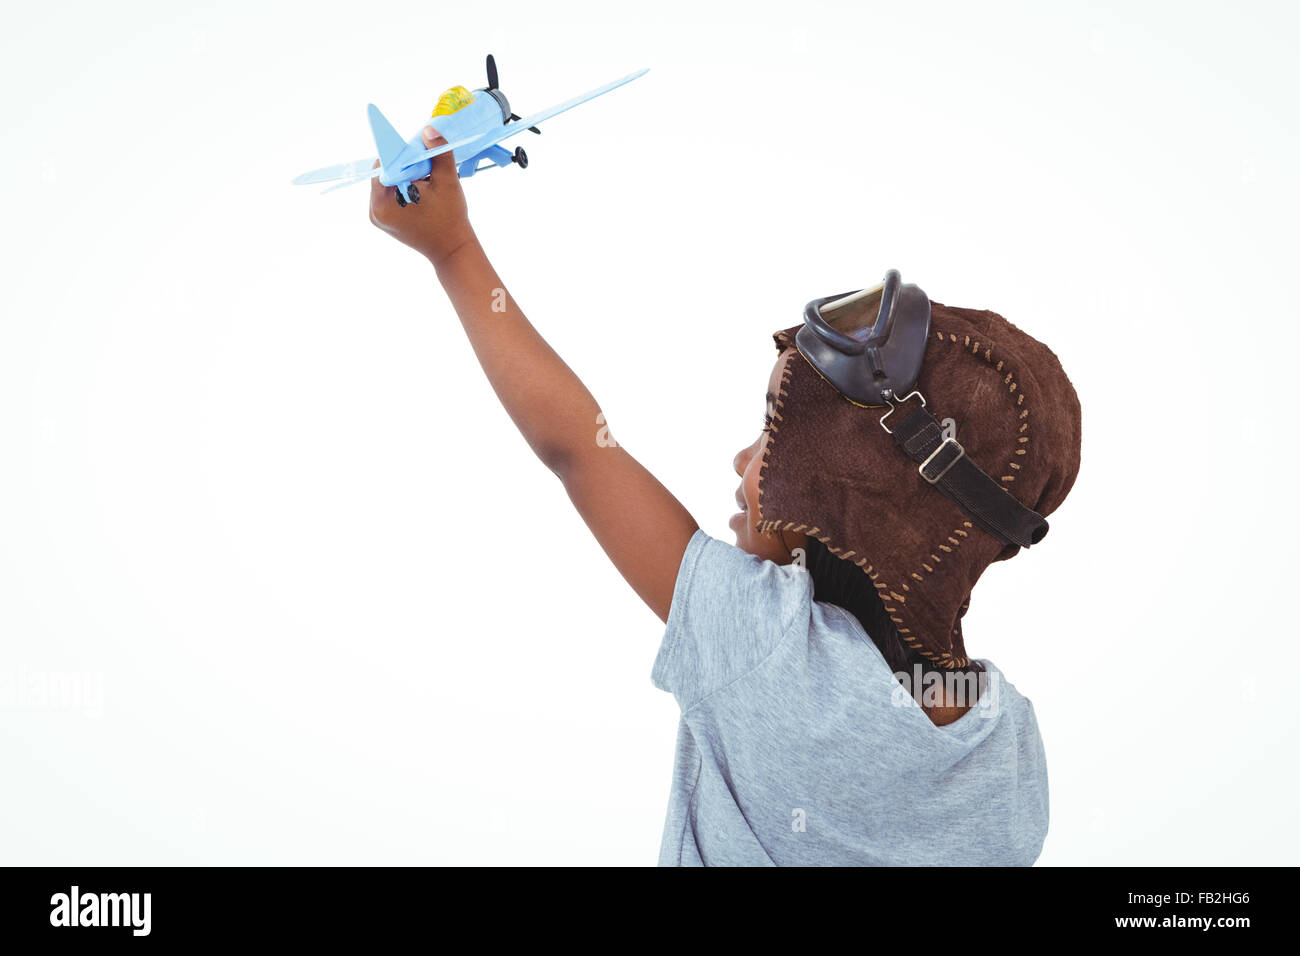 Article girl Playing with toy airplane Banque D'Images